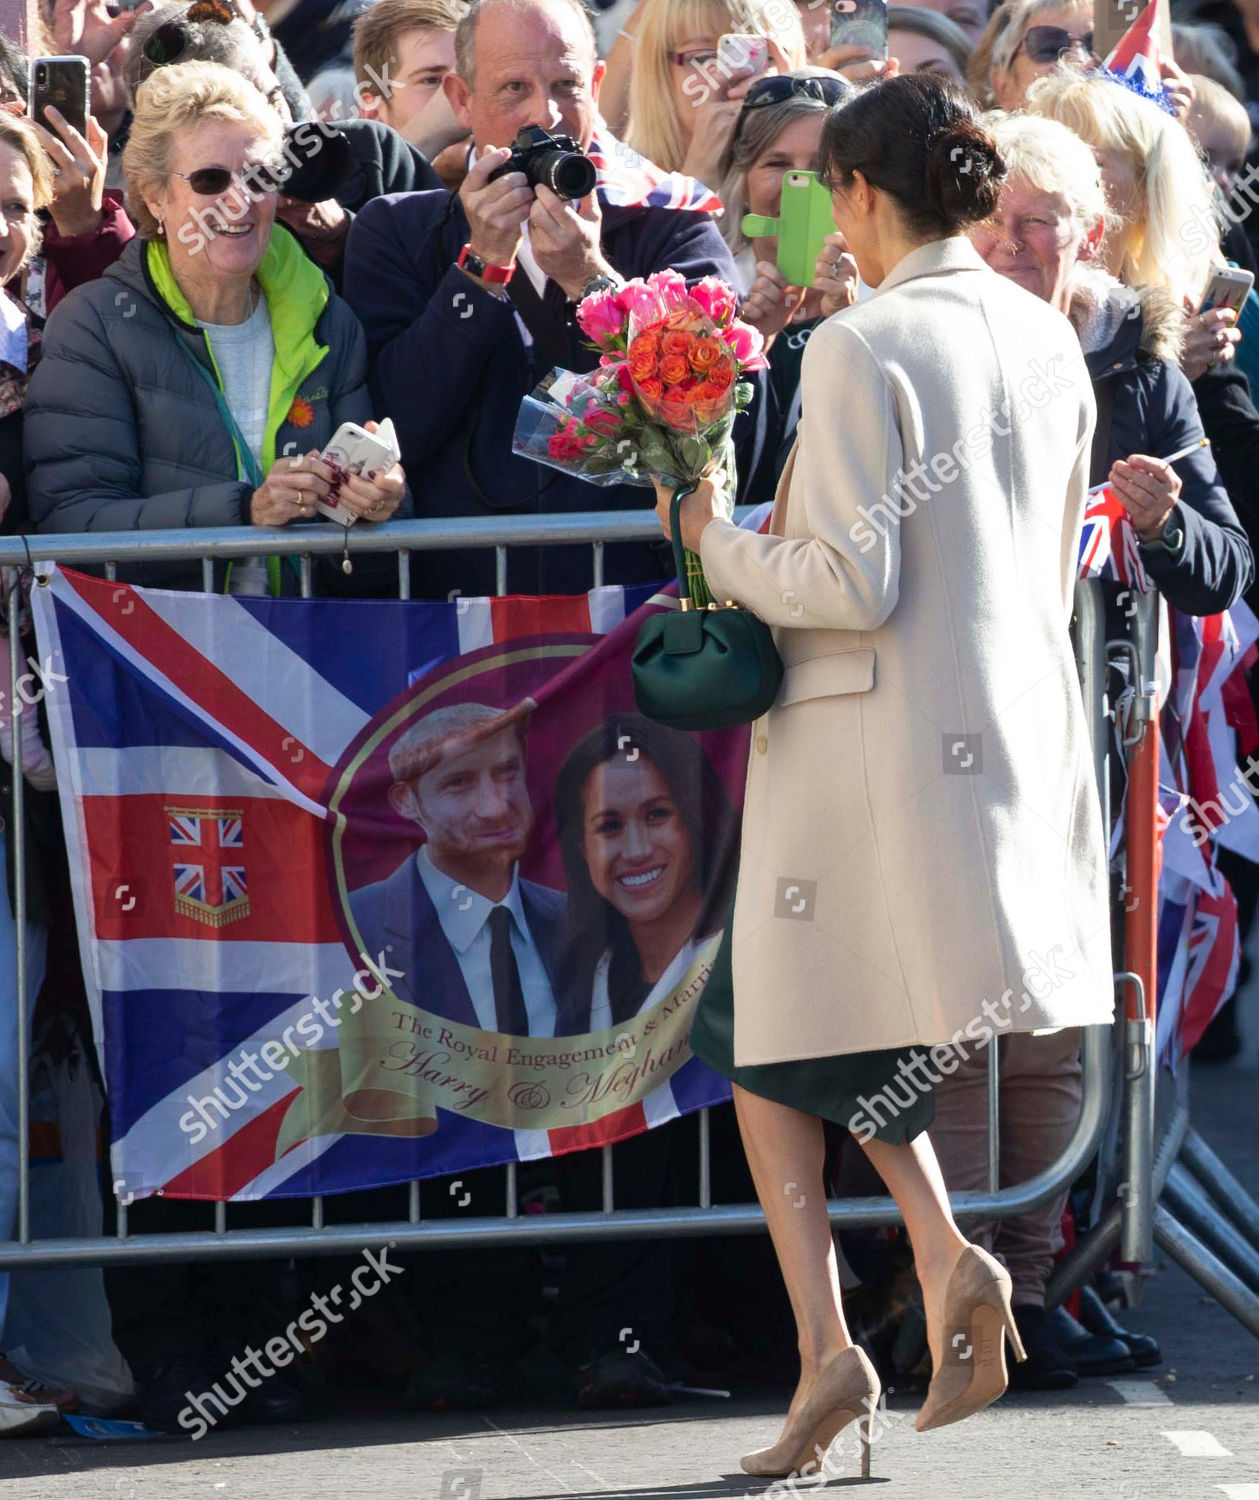 prince-harry-and-meghan-duchess-of-sussex-visit-to-sussex-uk-shutterstock-editorial-9912836t.jpg